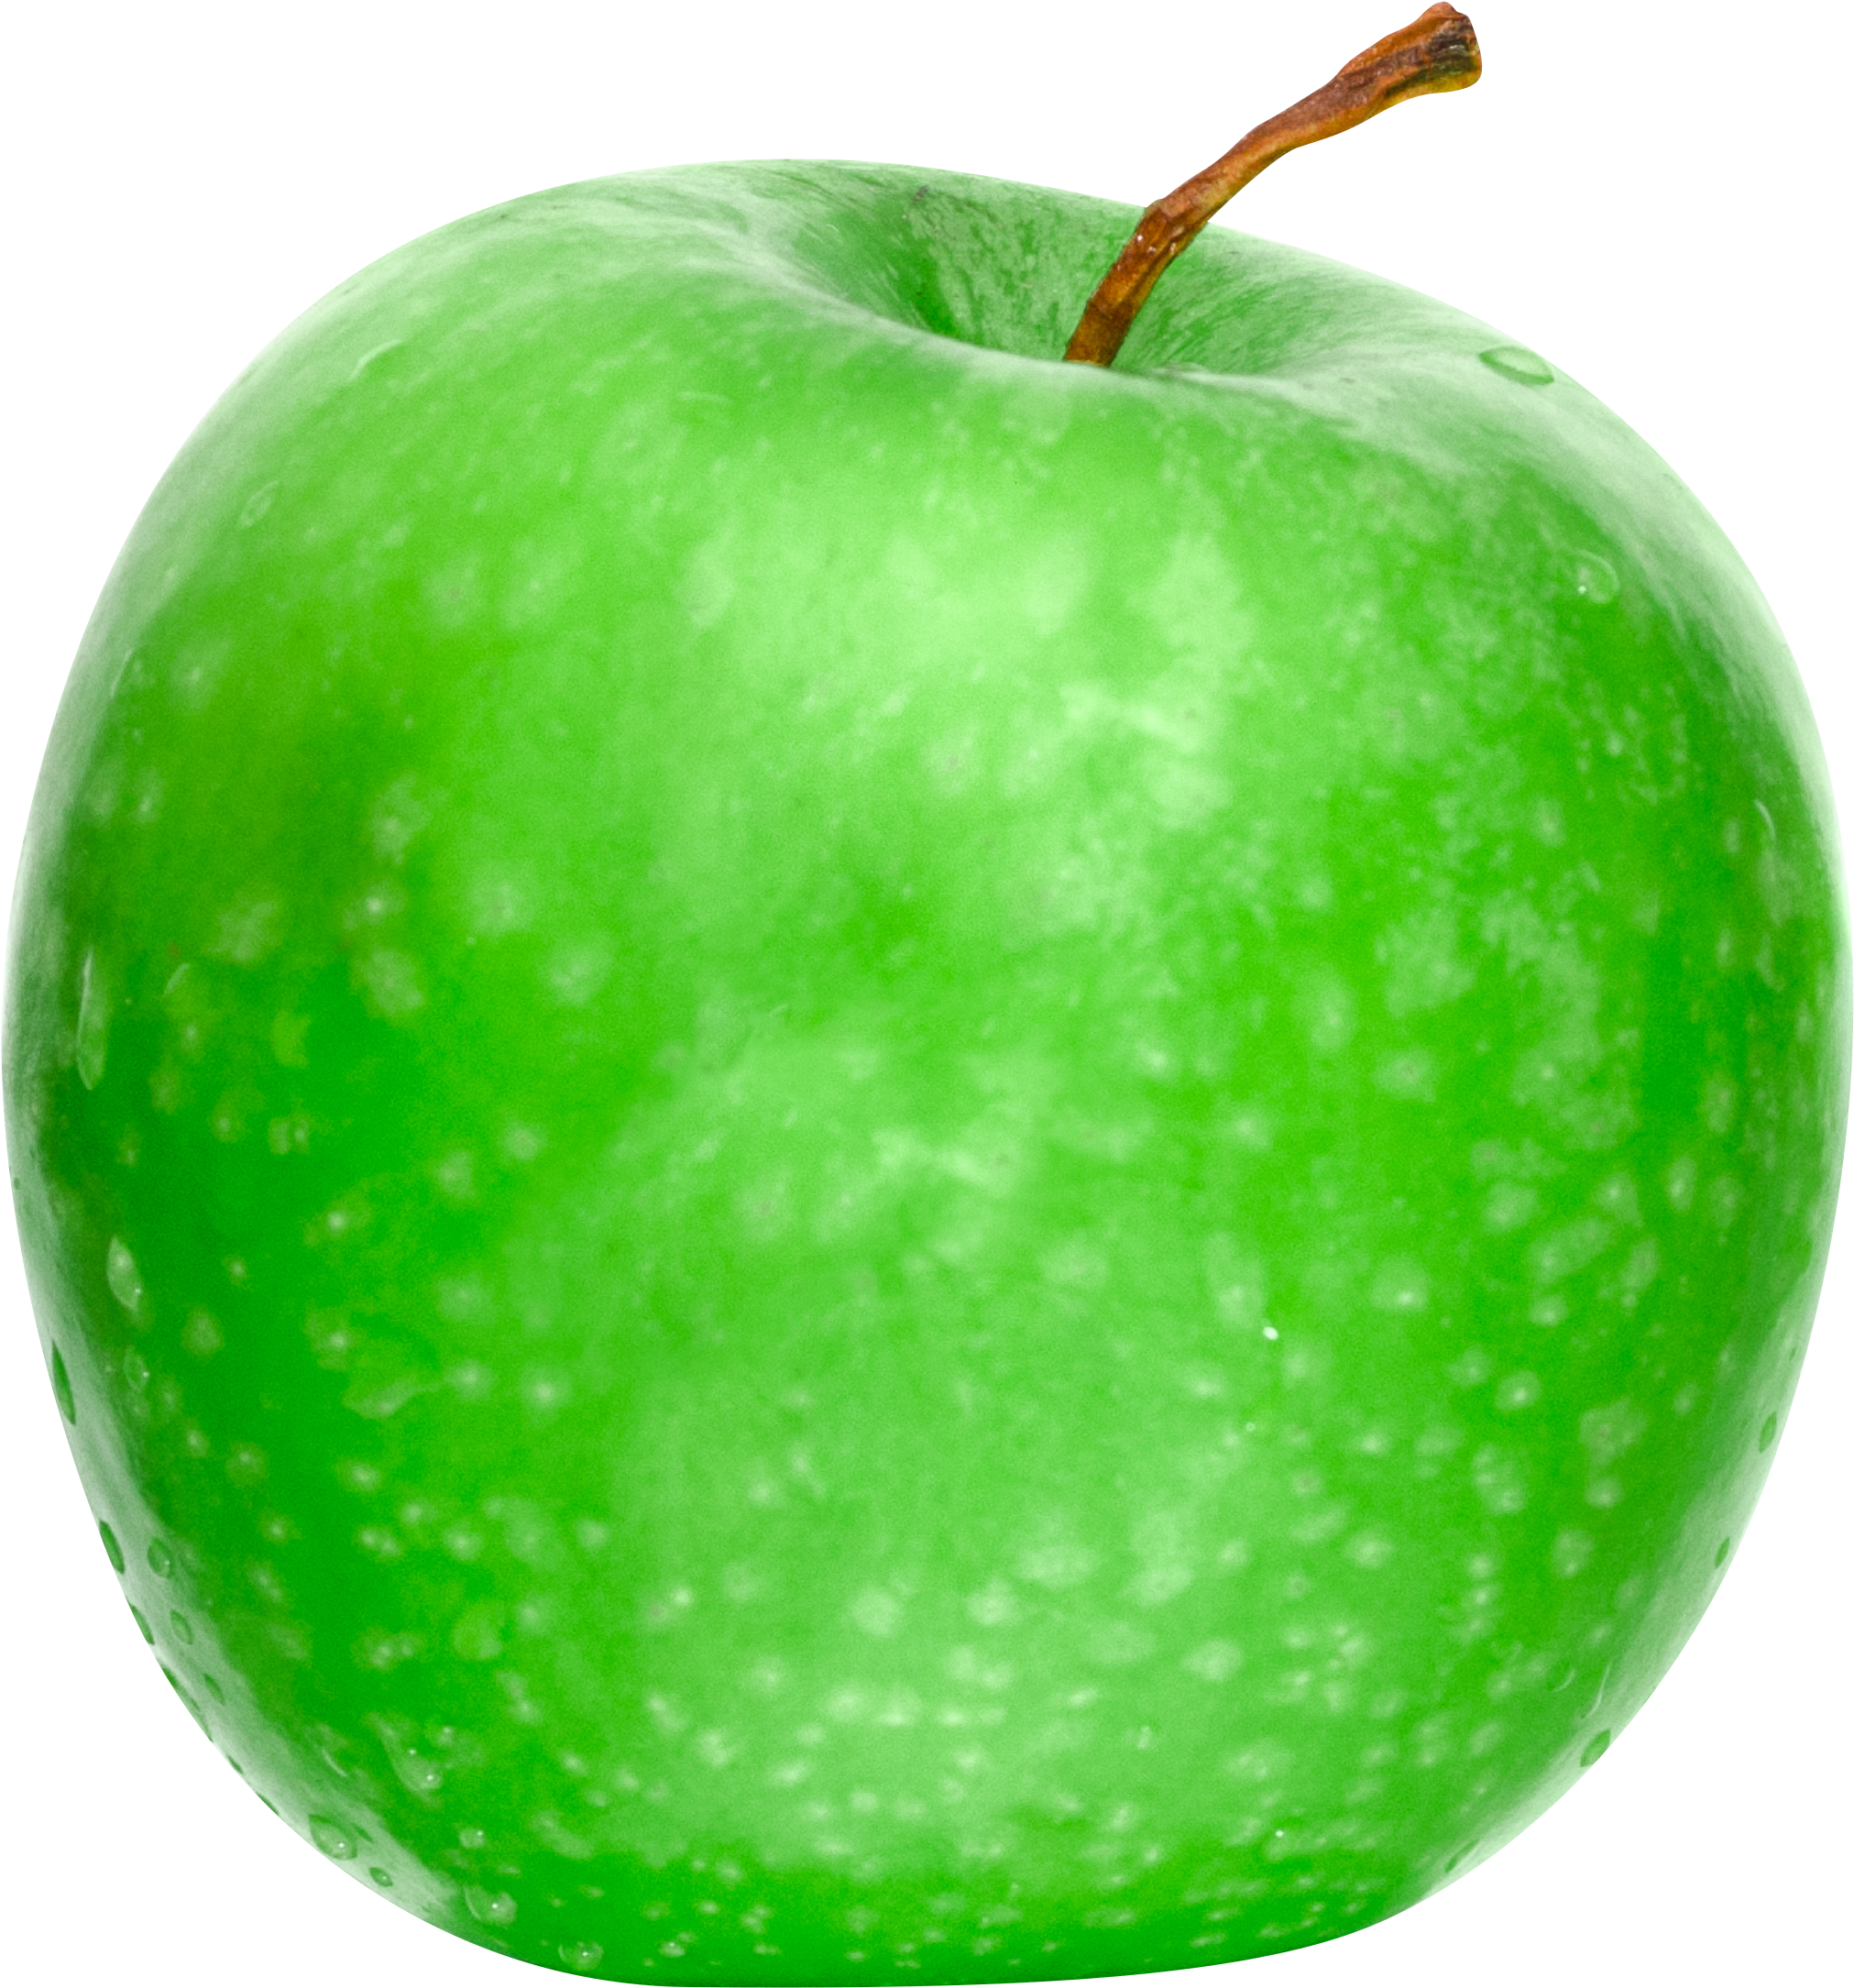 A Green Apple With A Stem